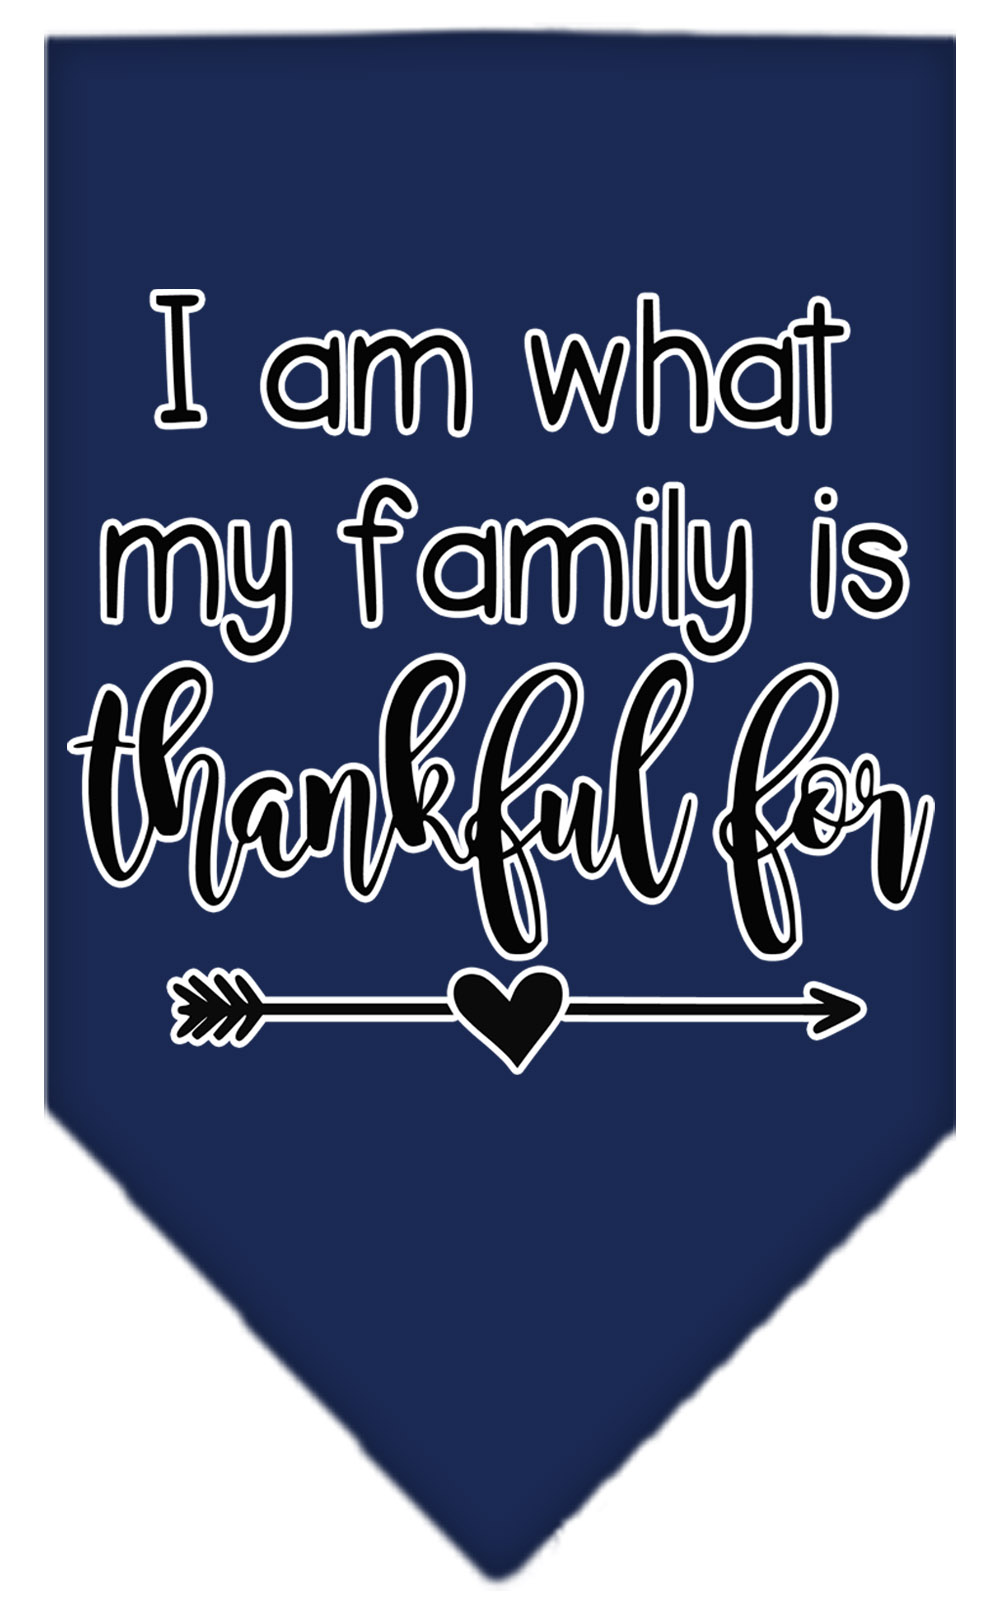 I Am What My Family is Thankful For Screen Print Bandana Navy Blue large